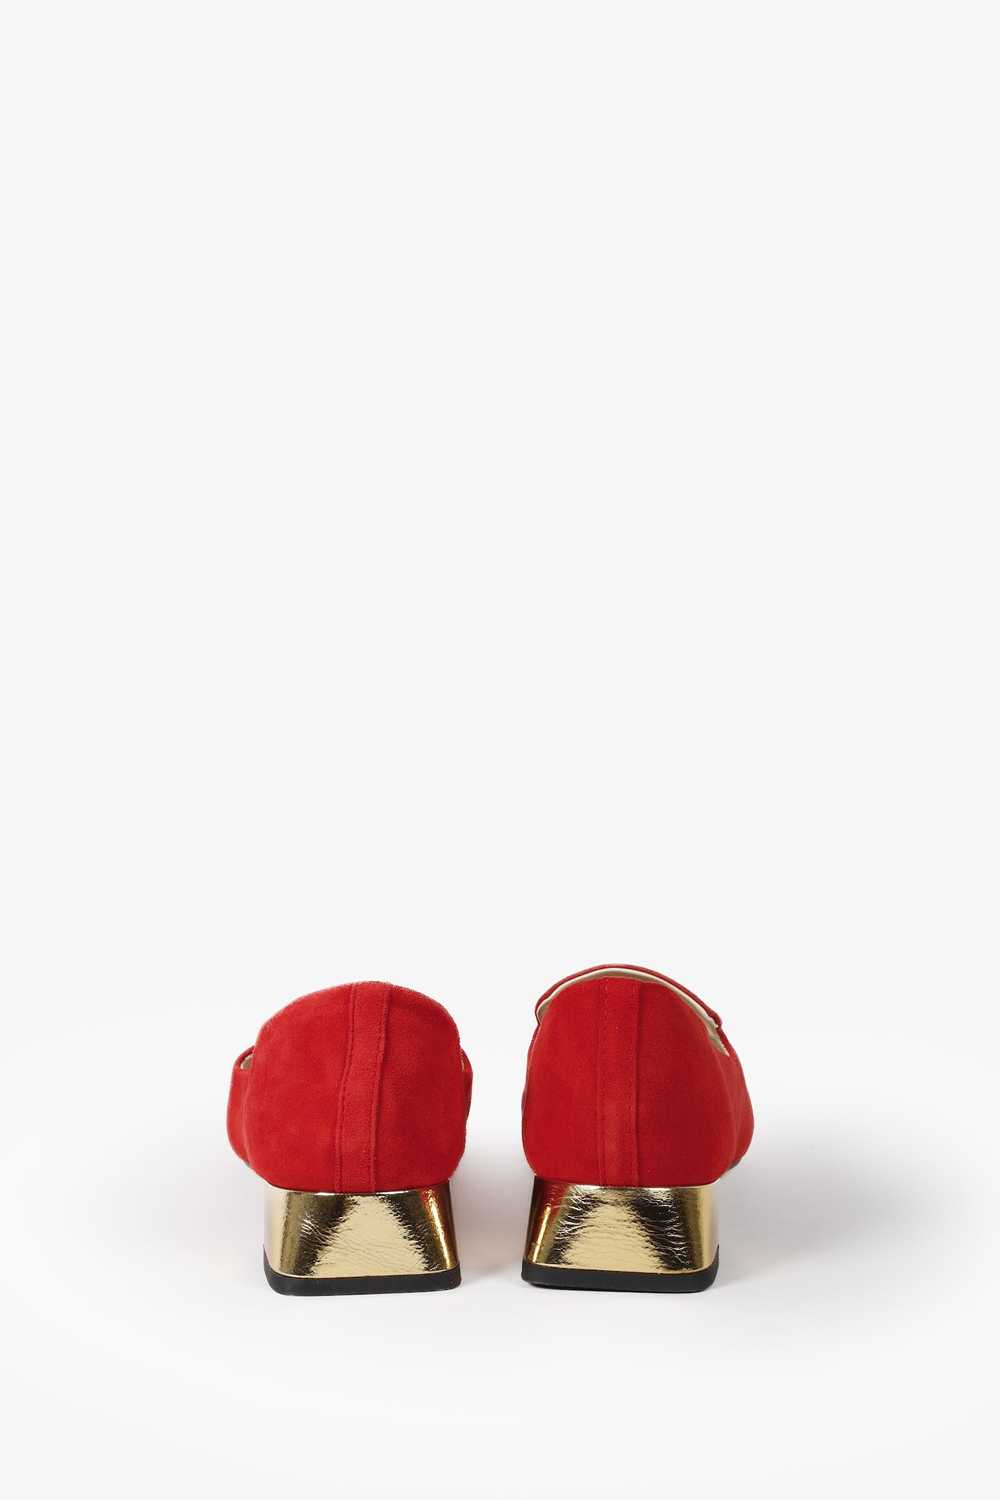 Repetto Repetto Red Suede Mathis Loafers - image 3